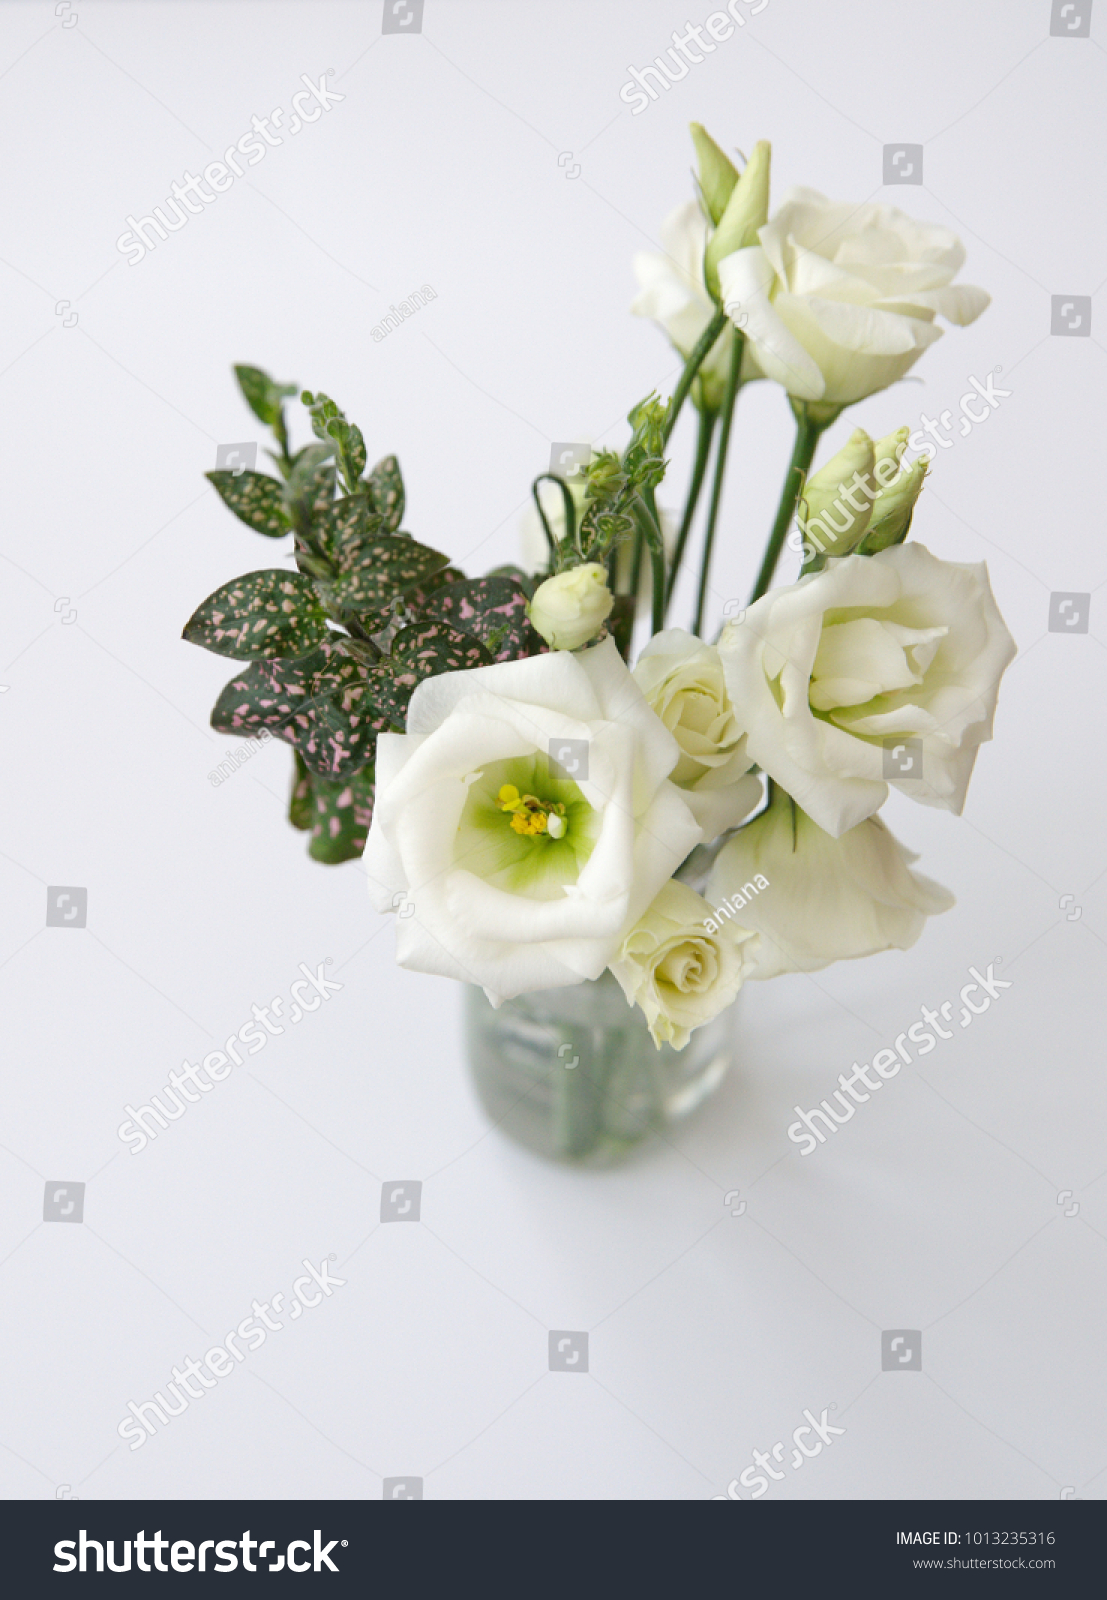 Bouquet White Flowers Polka Dot Plant Nature Stock Image 1013235316